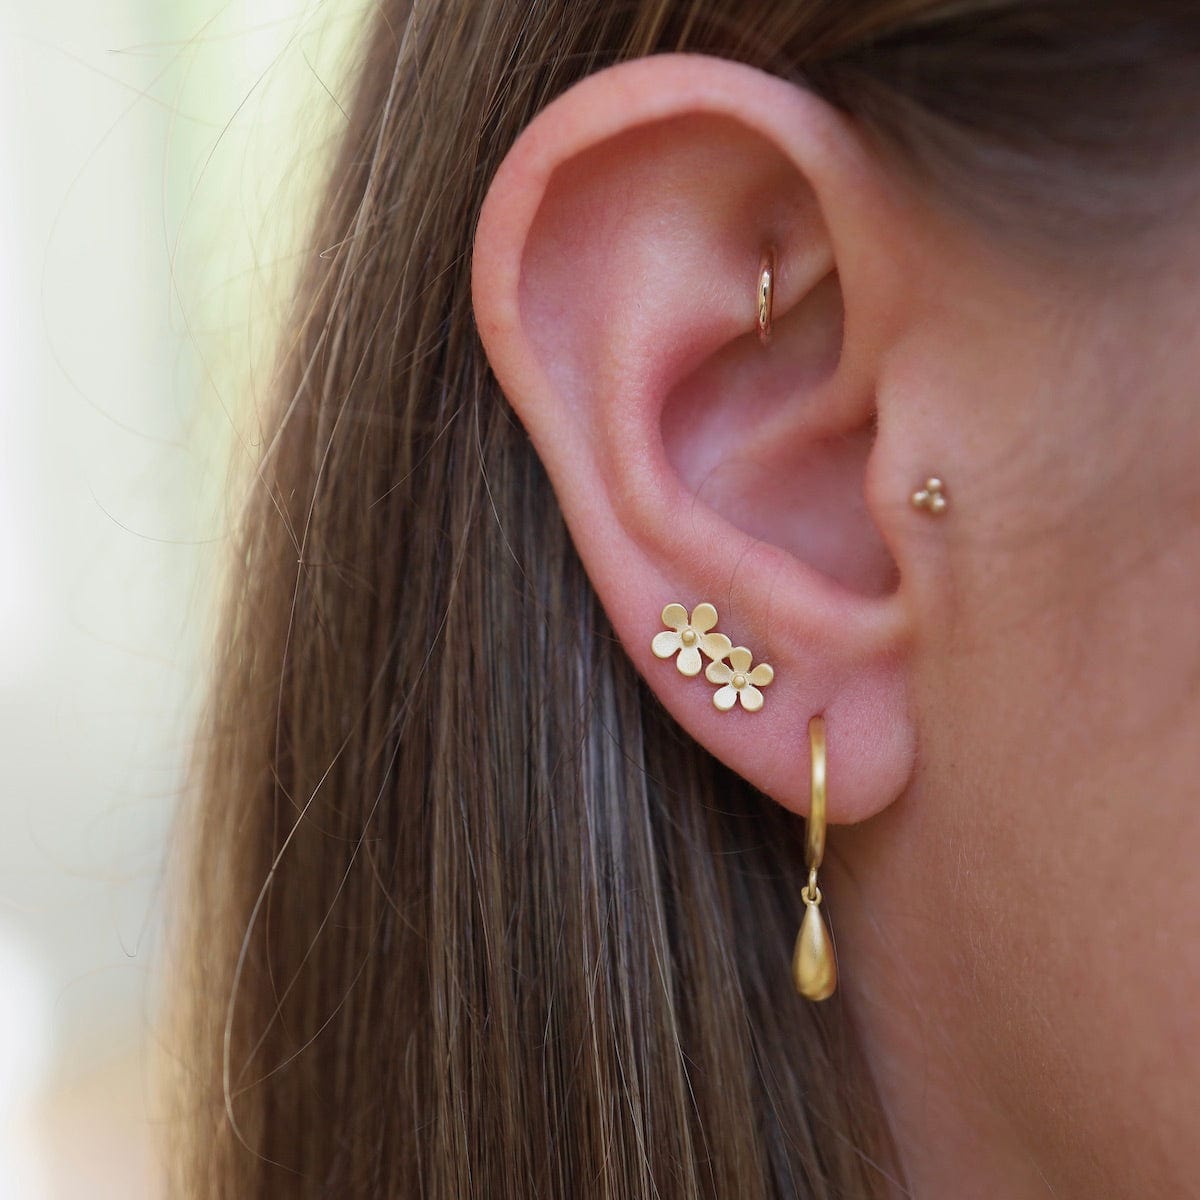 EAR-VRM Small Hoops with Hanging Drop - Brushed Gold Vermeil